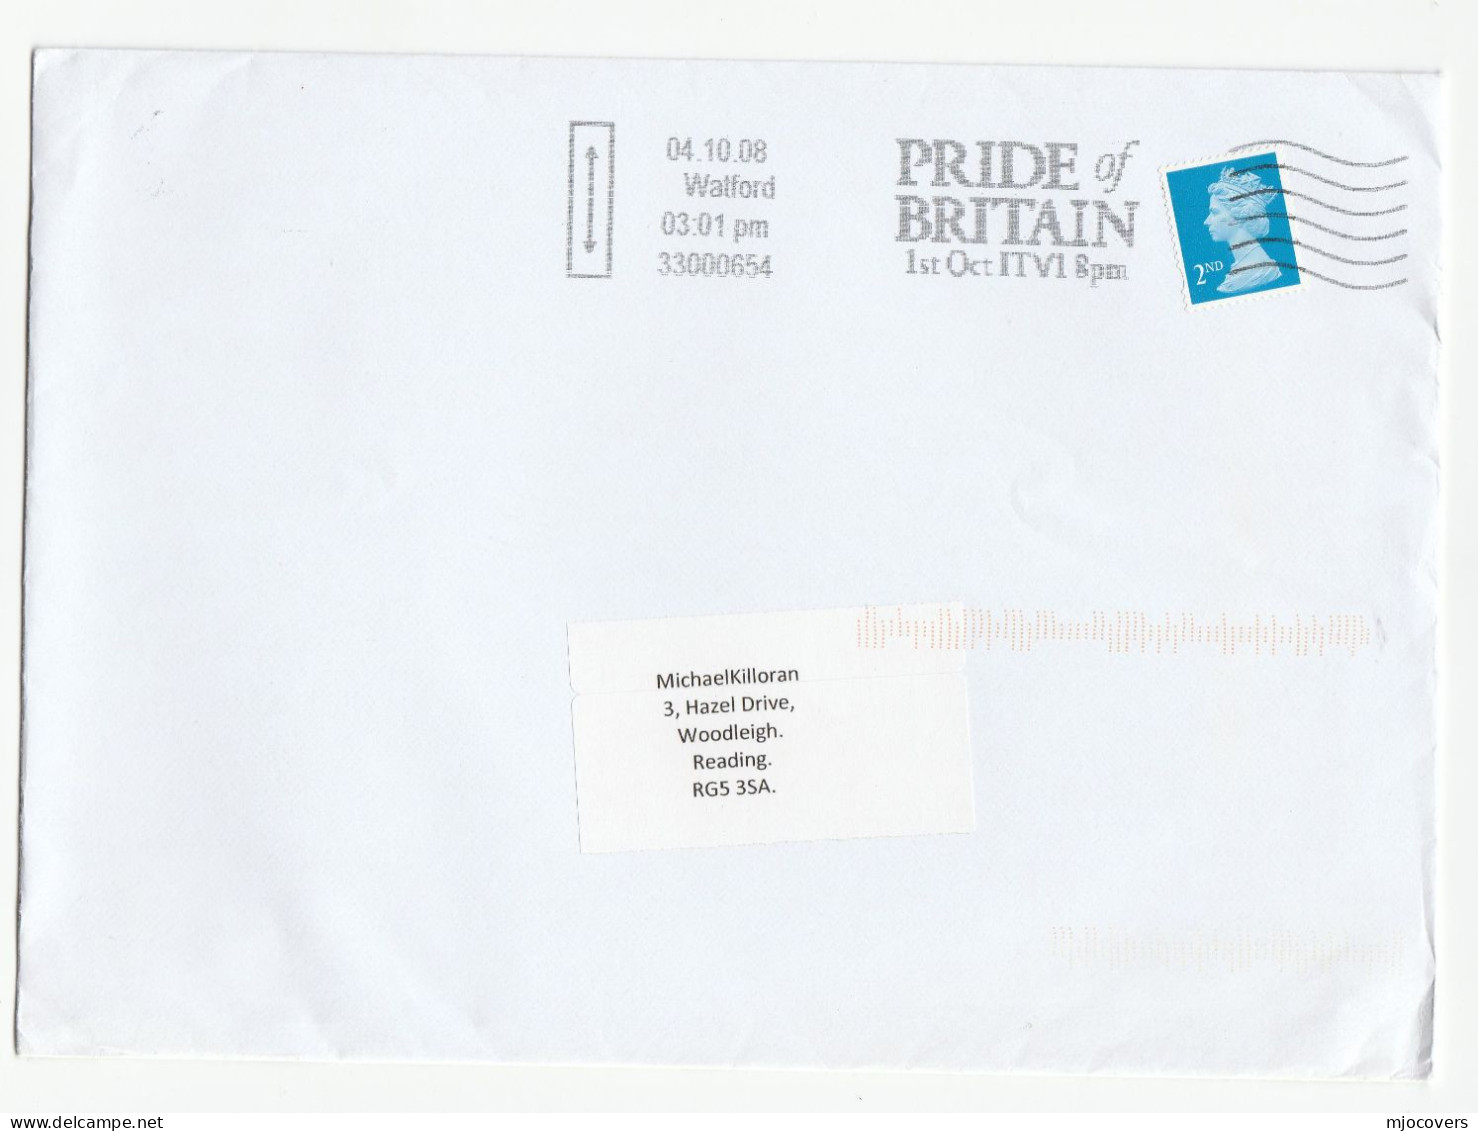 ITV1 PRIDE Of BRITAIN Cover SLOGAN 2008 Watford GB Stamps Broadcasting Television - Covers & Documents